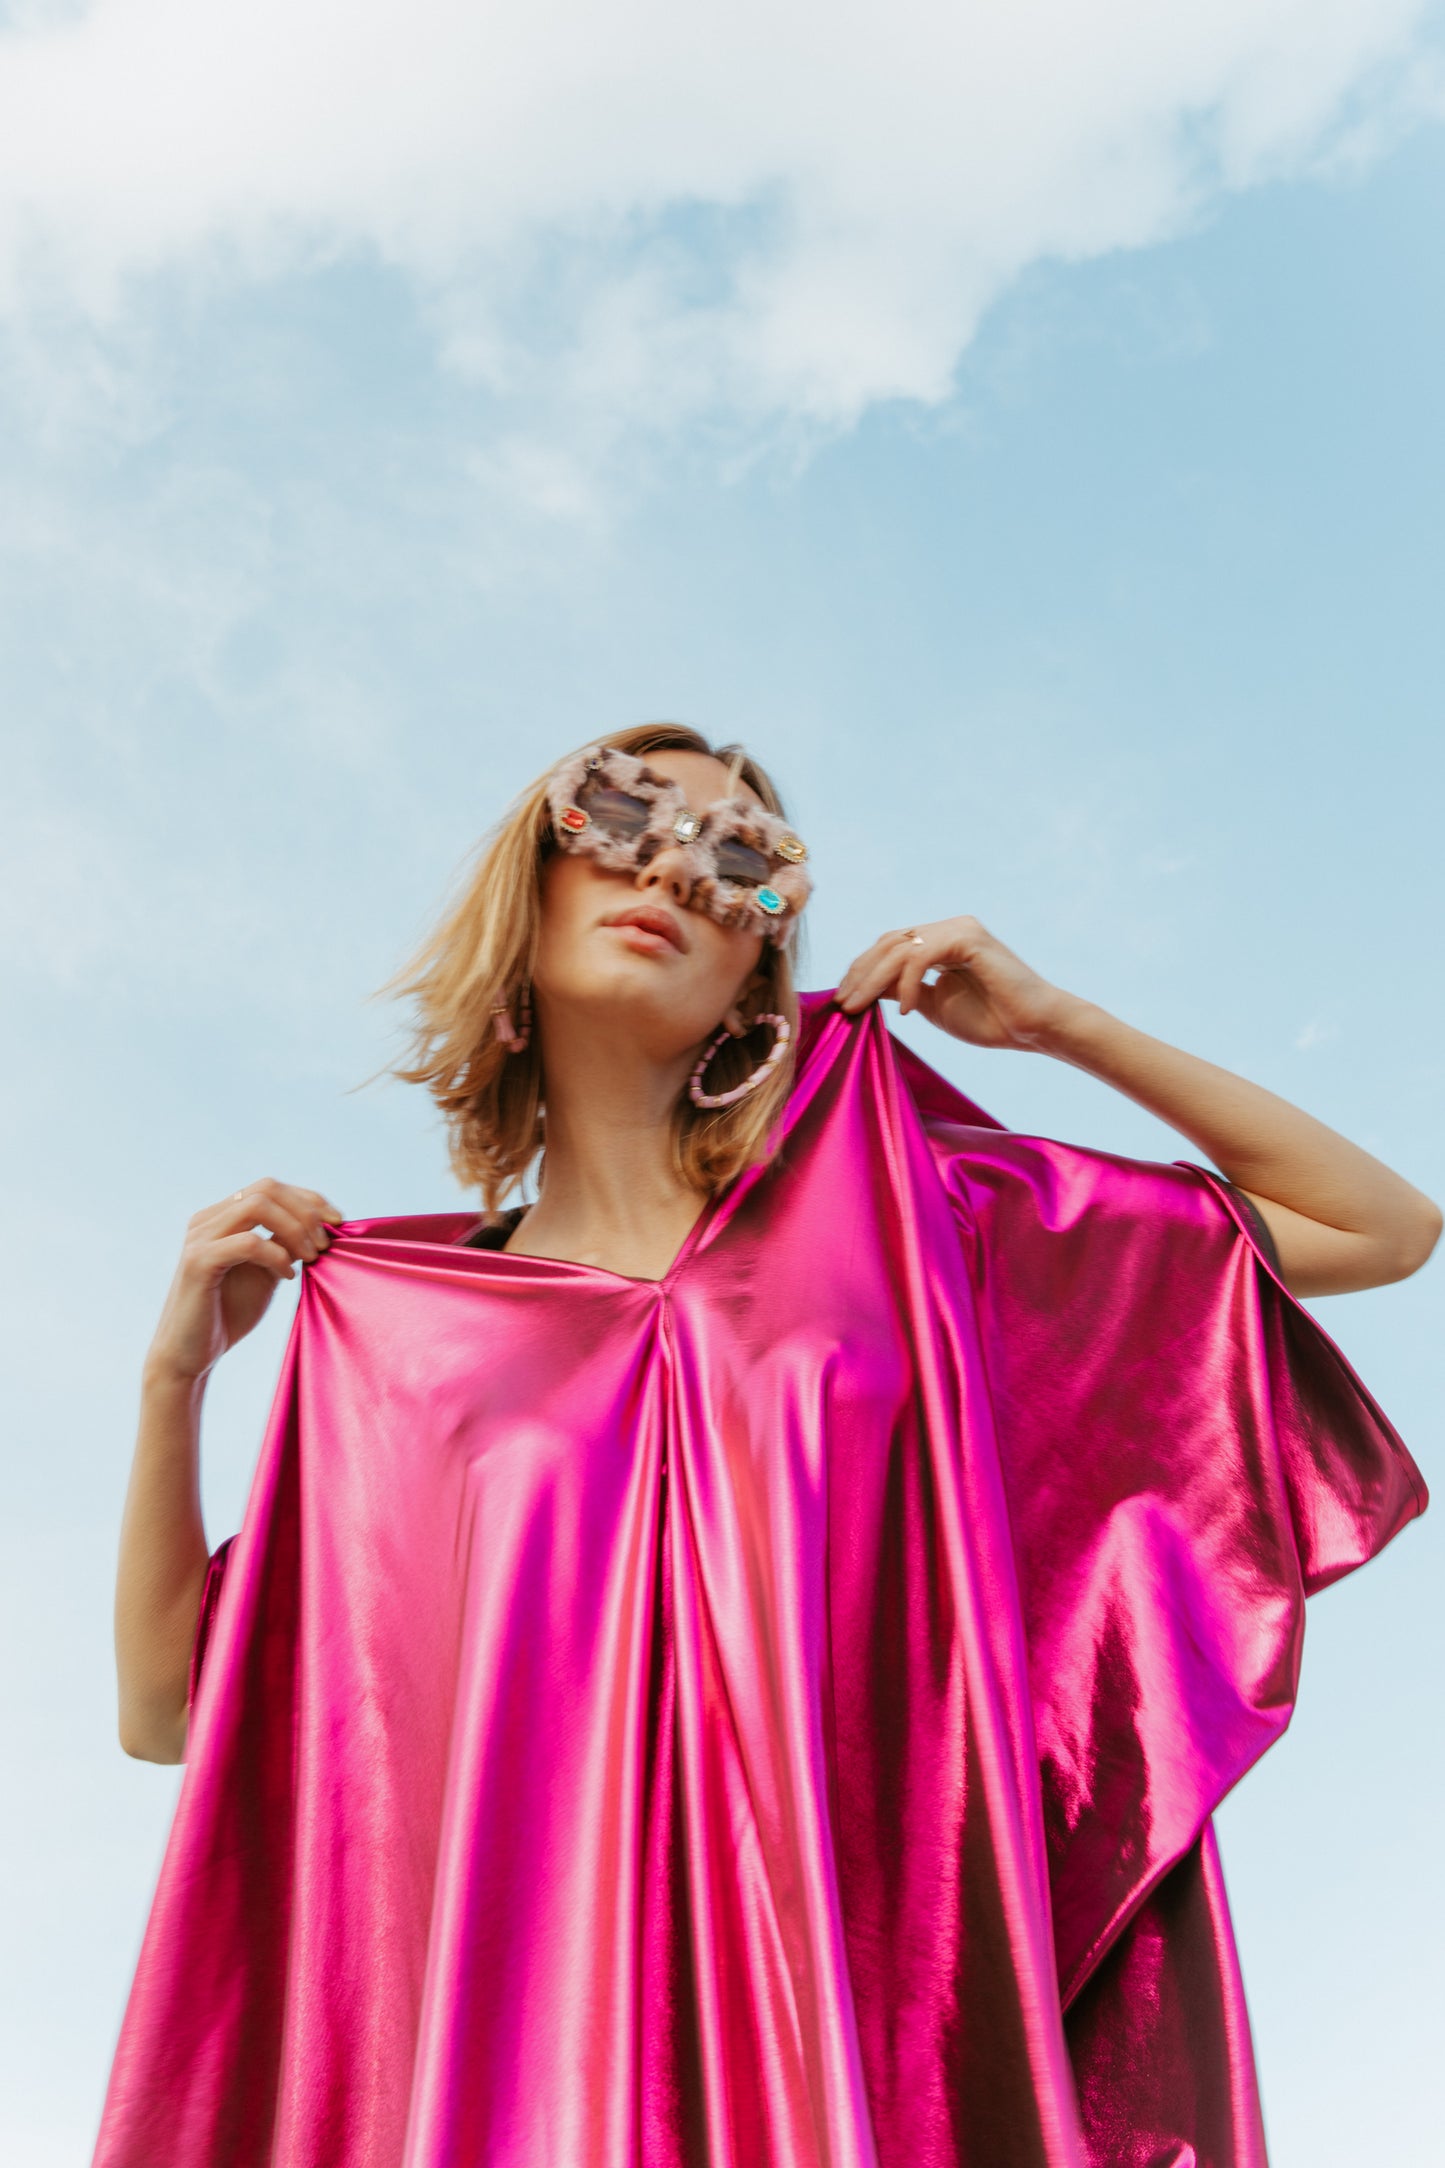 Bold, metallic caftan crafted from a slinky black jersey coated with a deep fuchsia foil that shimmers in the light. The caftan has a generous, free-flowing cut, with ample fabric creating an elegant, loose fit that drapes comfortably over the body, with batwing sleeves and a deep v-neckline.